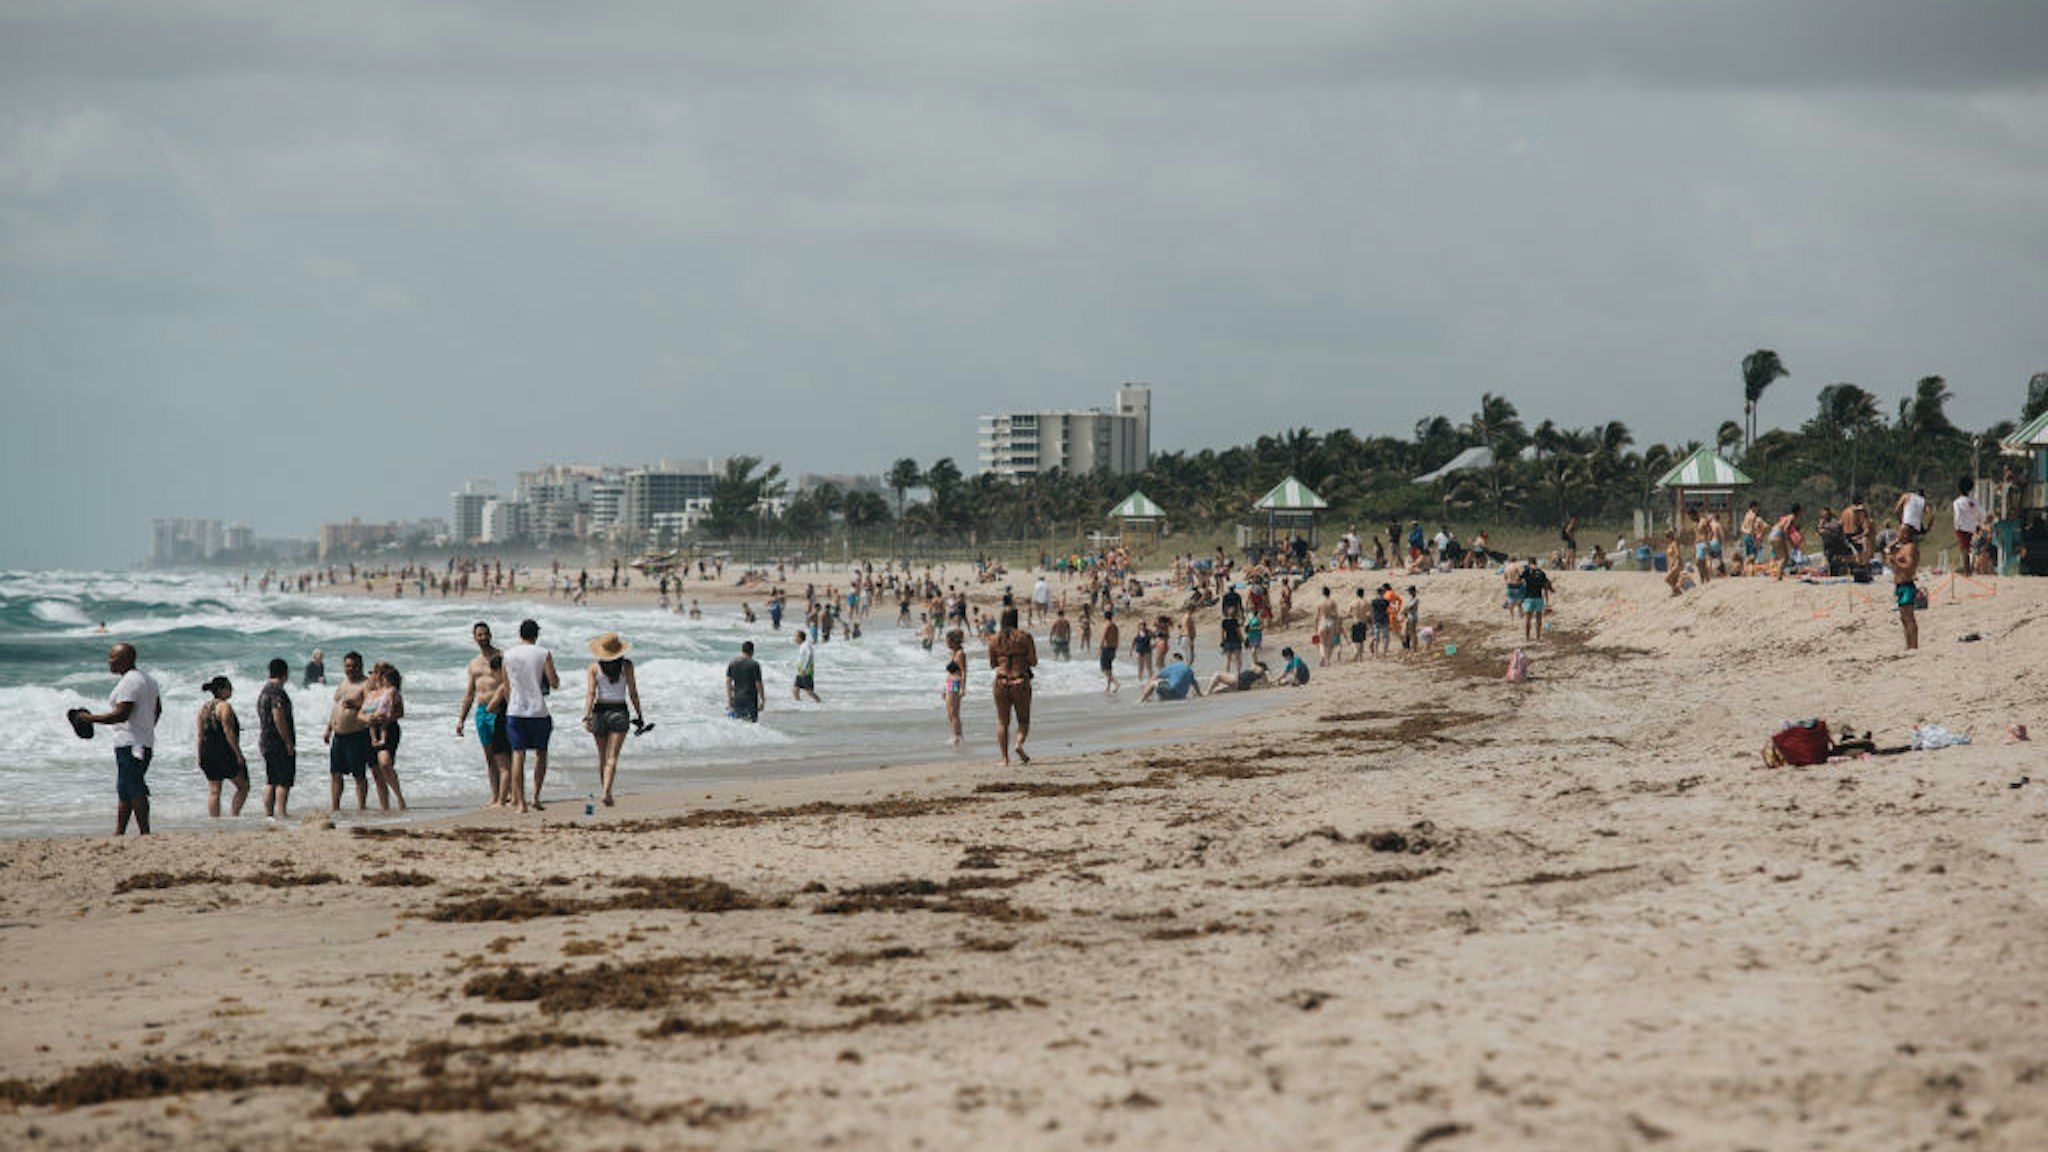 People gather at the beach in Delray Beach, Florida, U.S., on Saturday May 23, 2020.